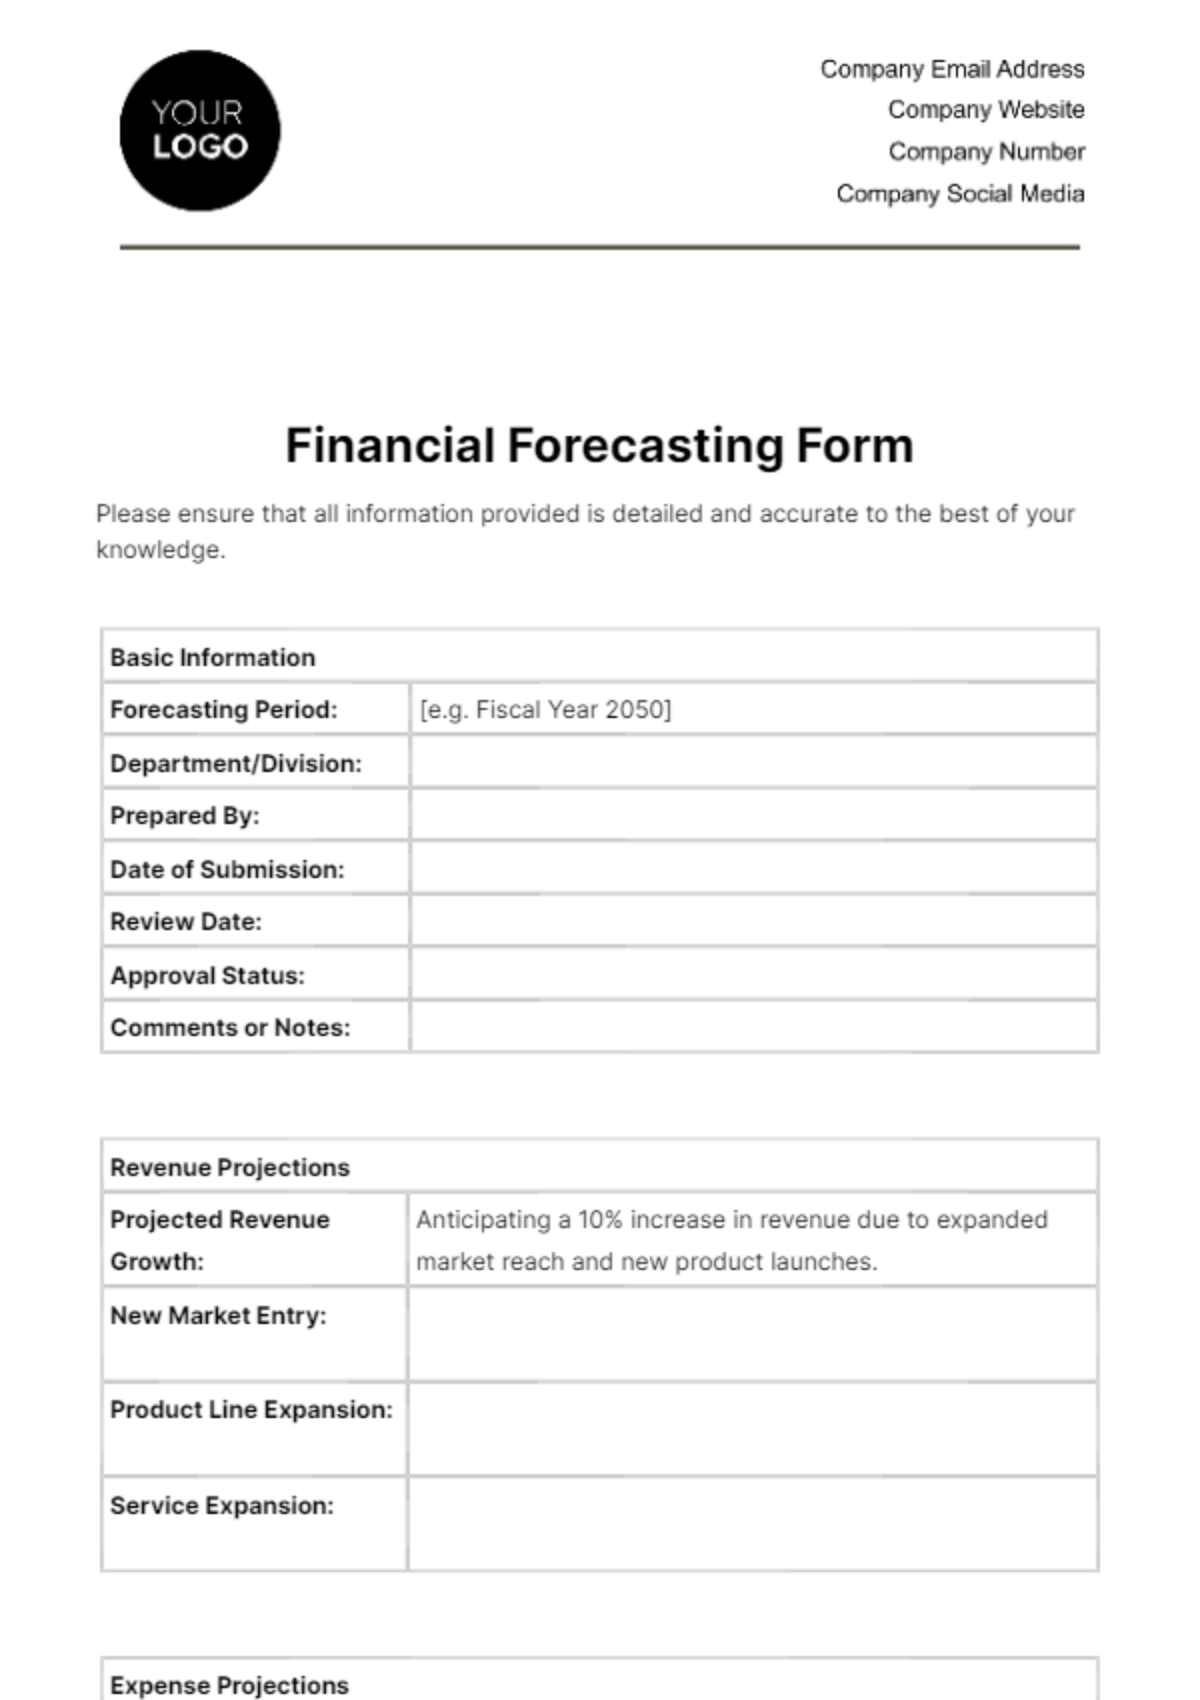 Financial Forecasting Form Template